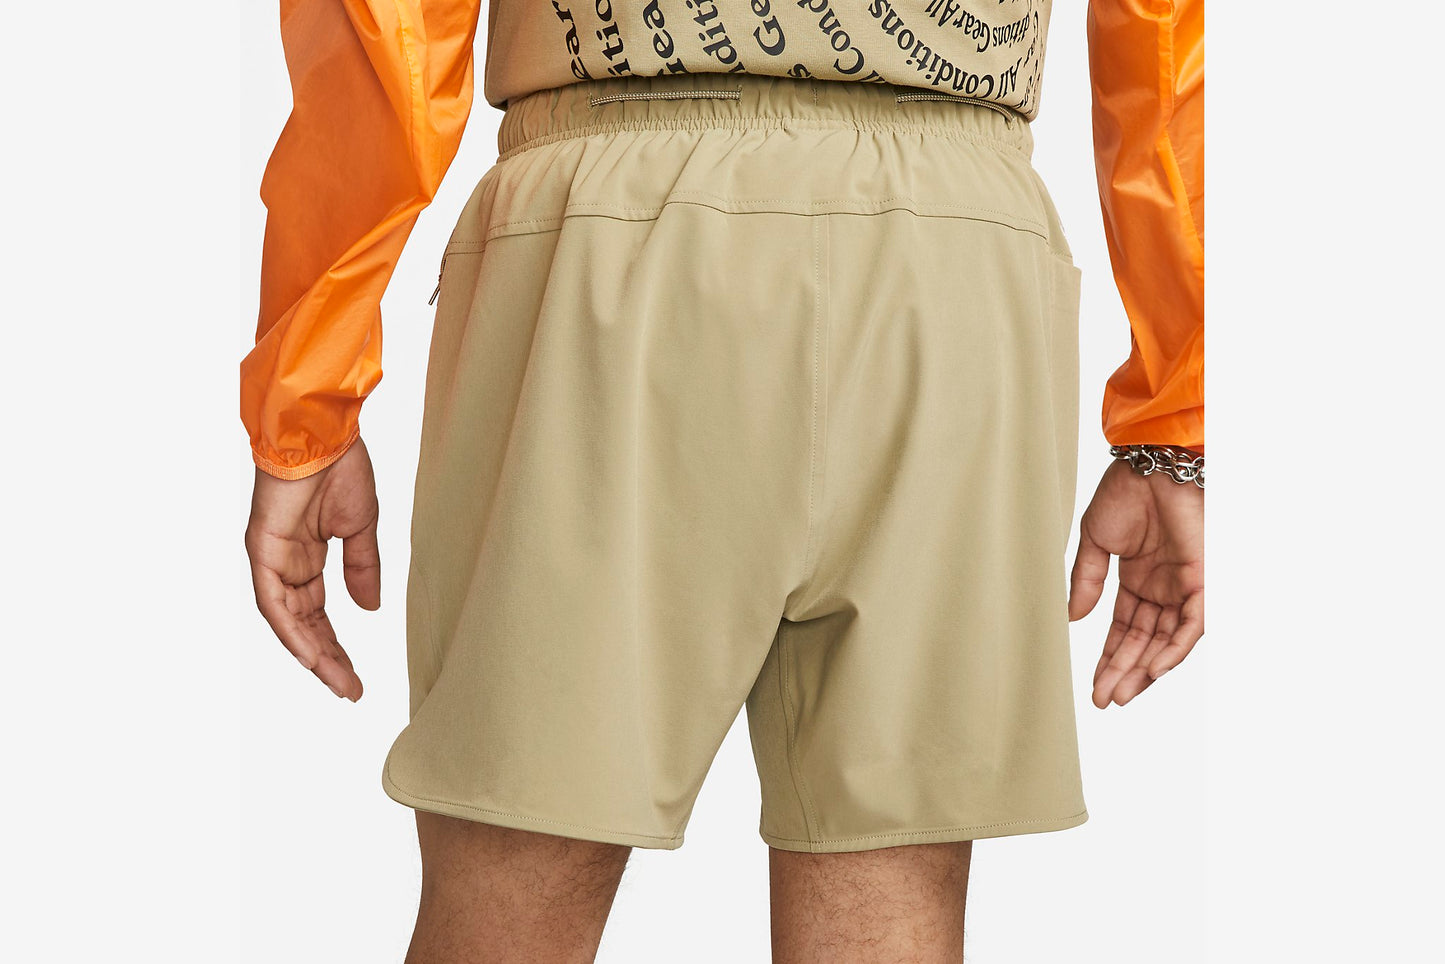 Nike "ACG Dri-FIT "New Sands Shorts" M - Neutral Olive/Light Orewood Brown/Summit White